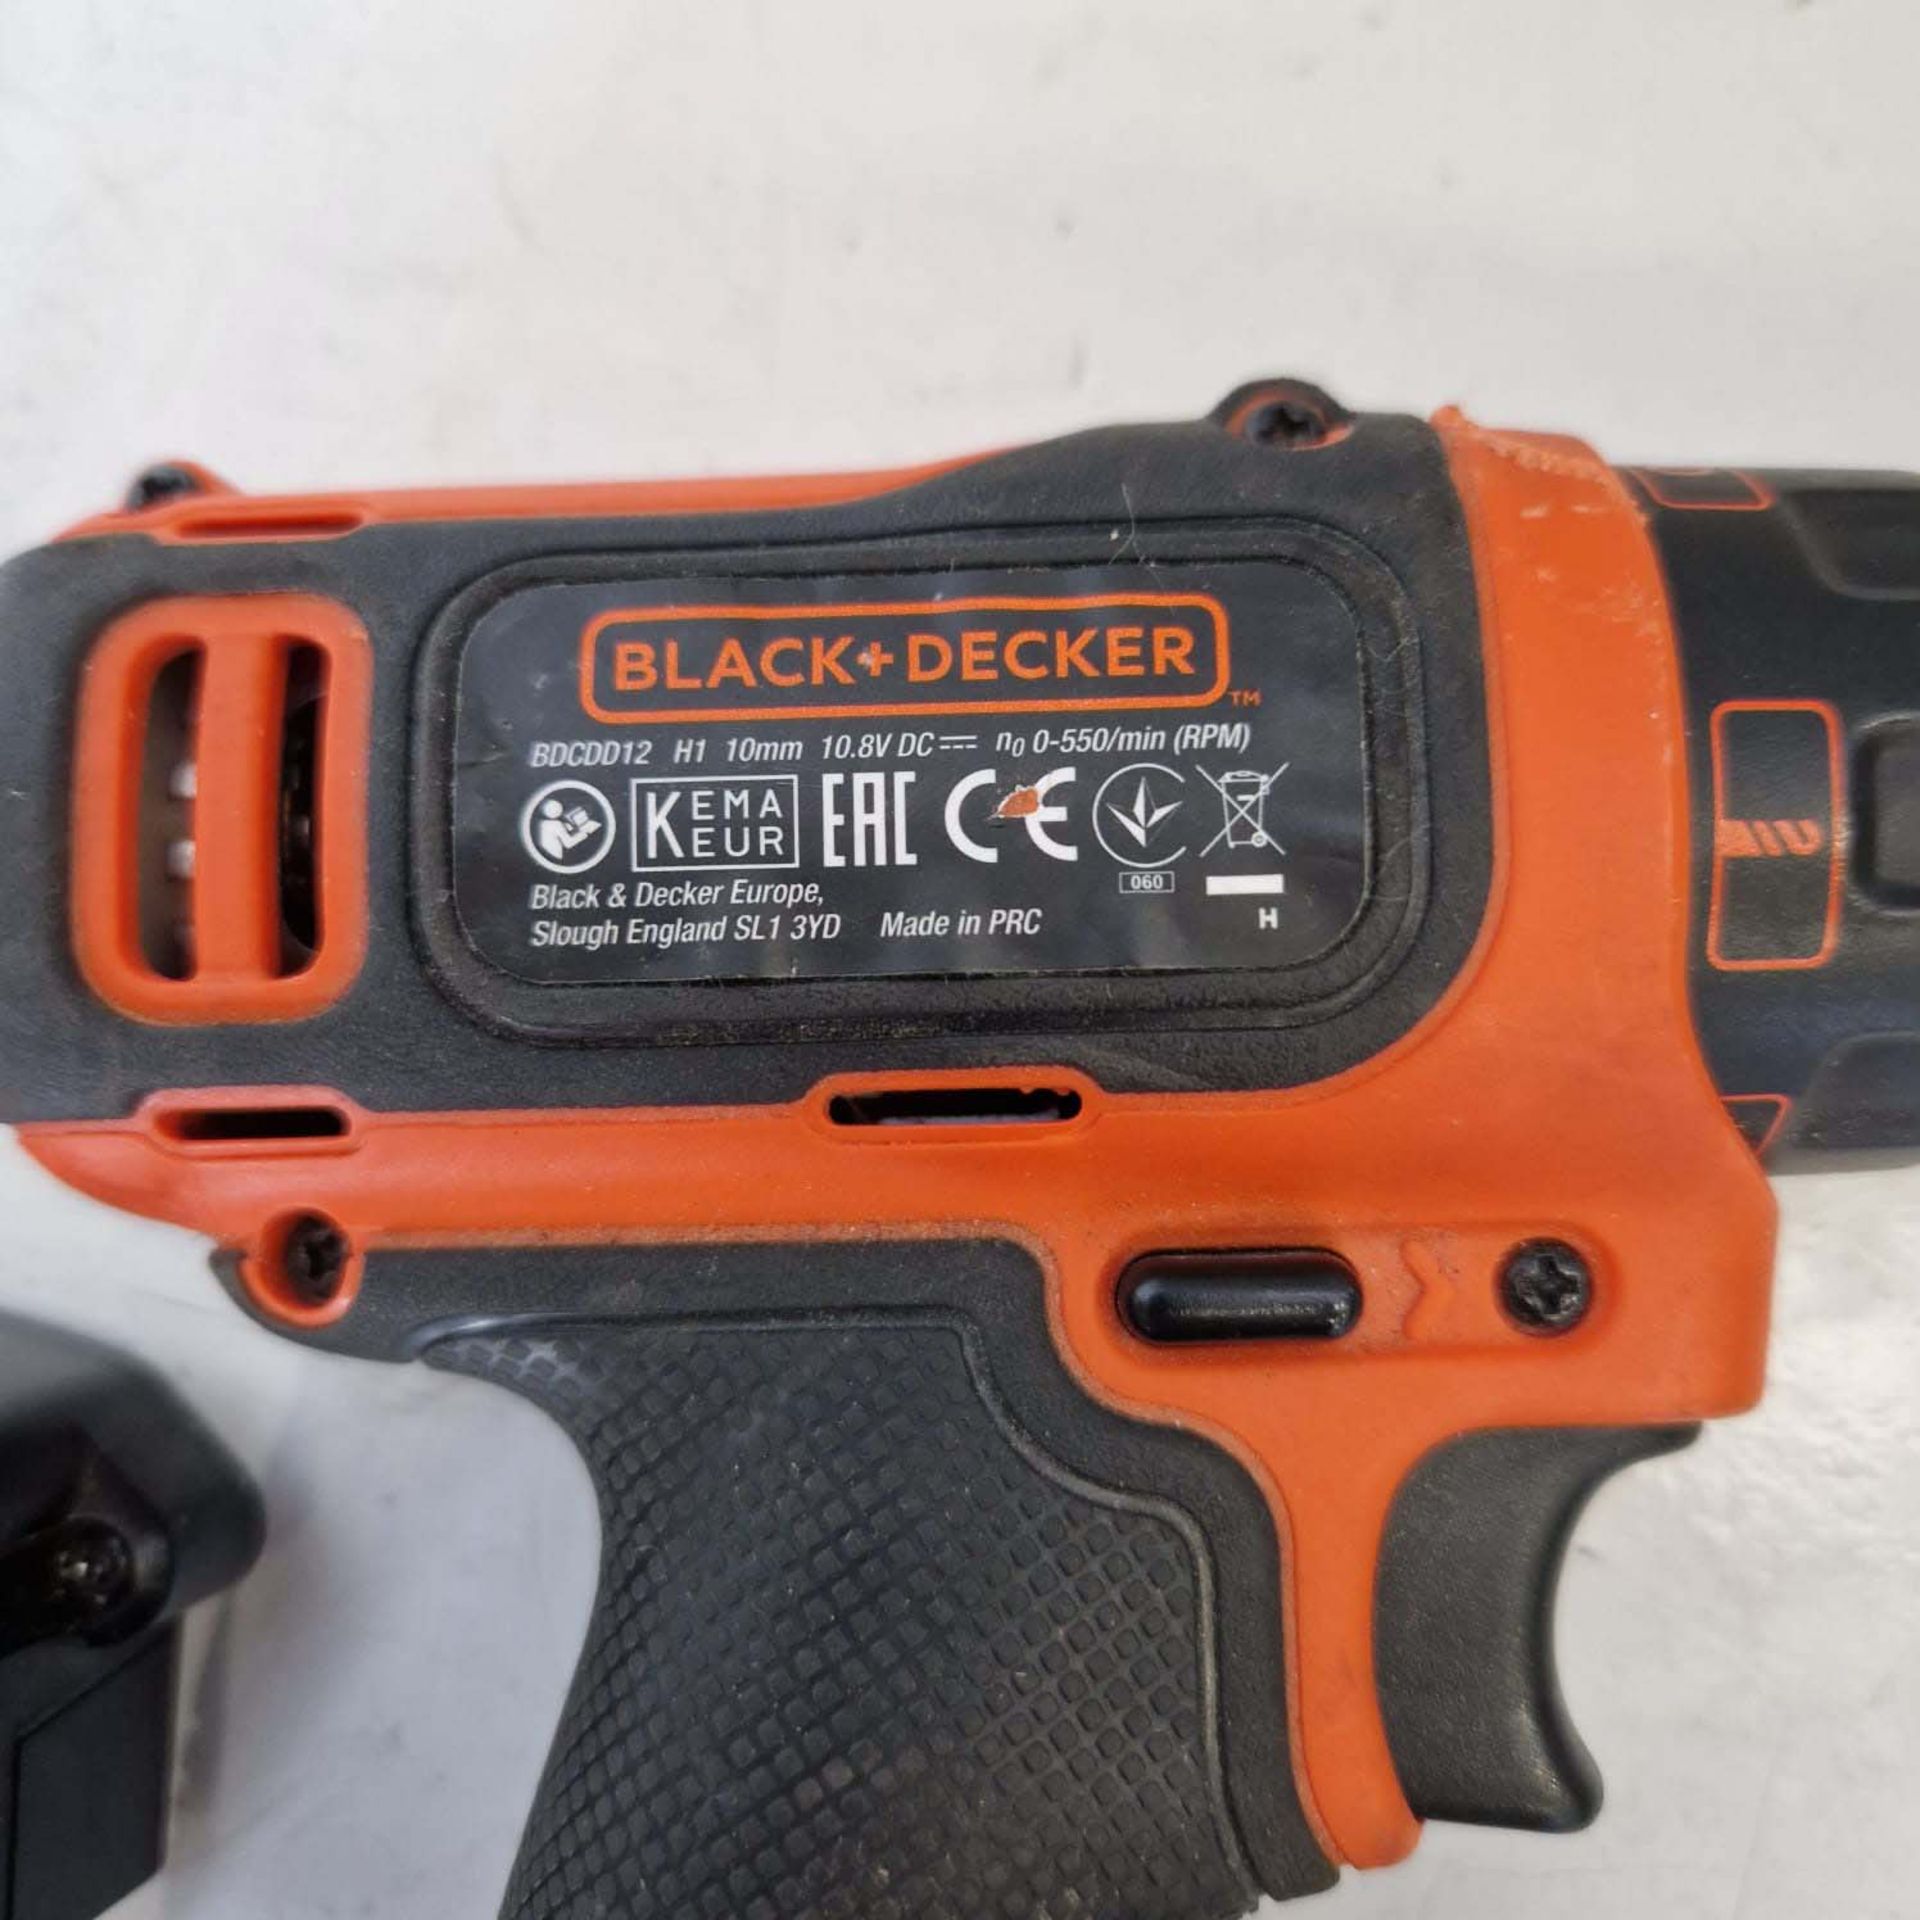 Black & Decker Model BDCDD12 Cordless Drill with Lithium 10.8V Battery & Charger. Capacity 10mm. - Bild 3 aus 4